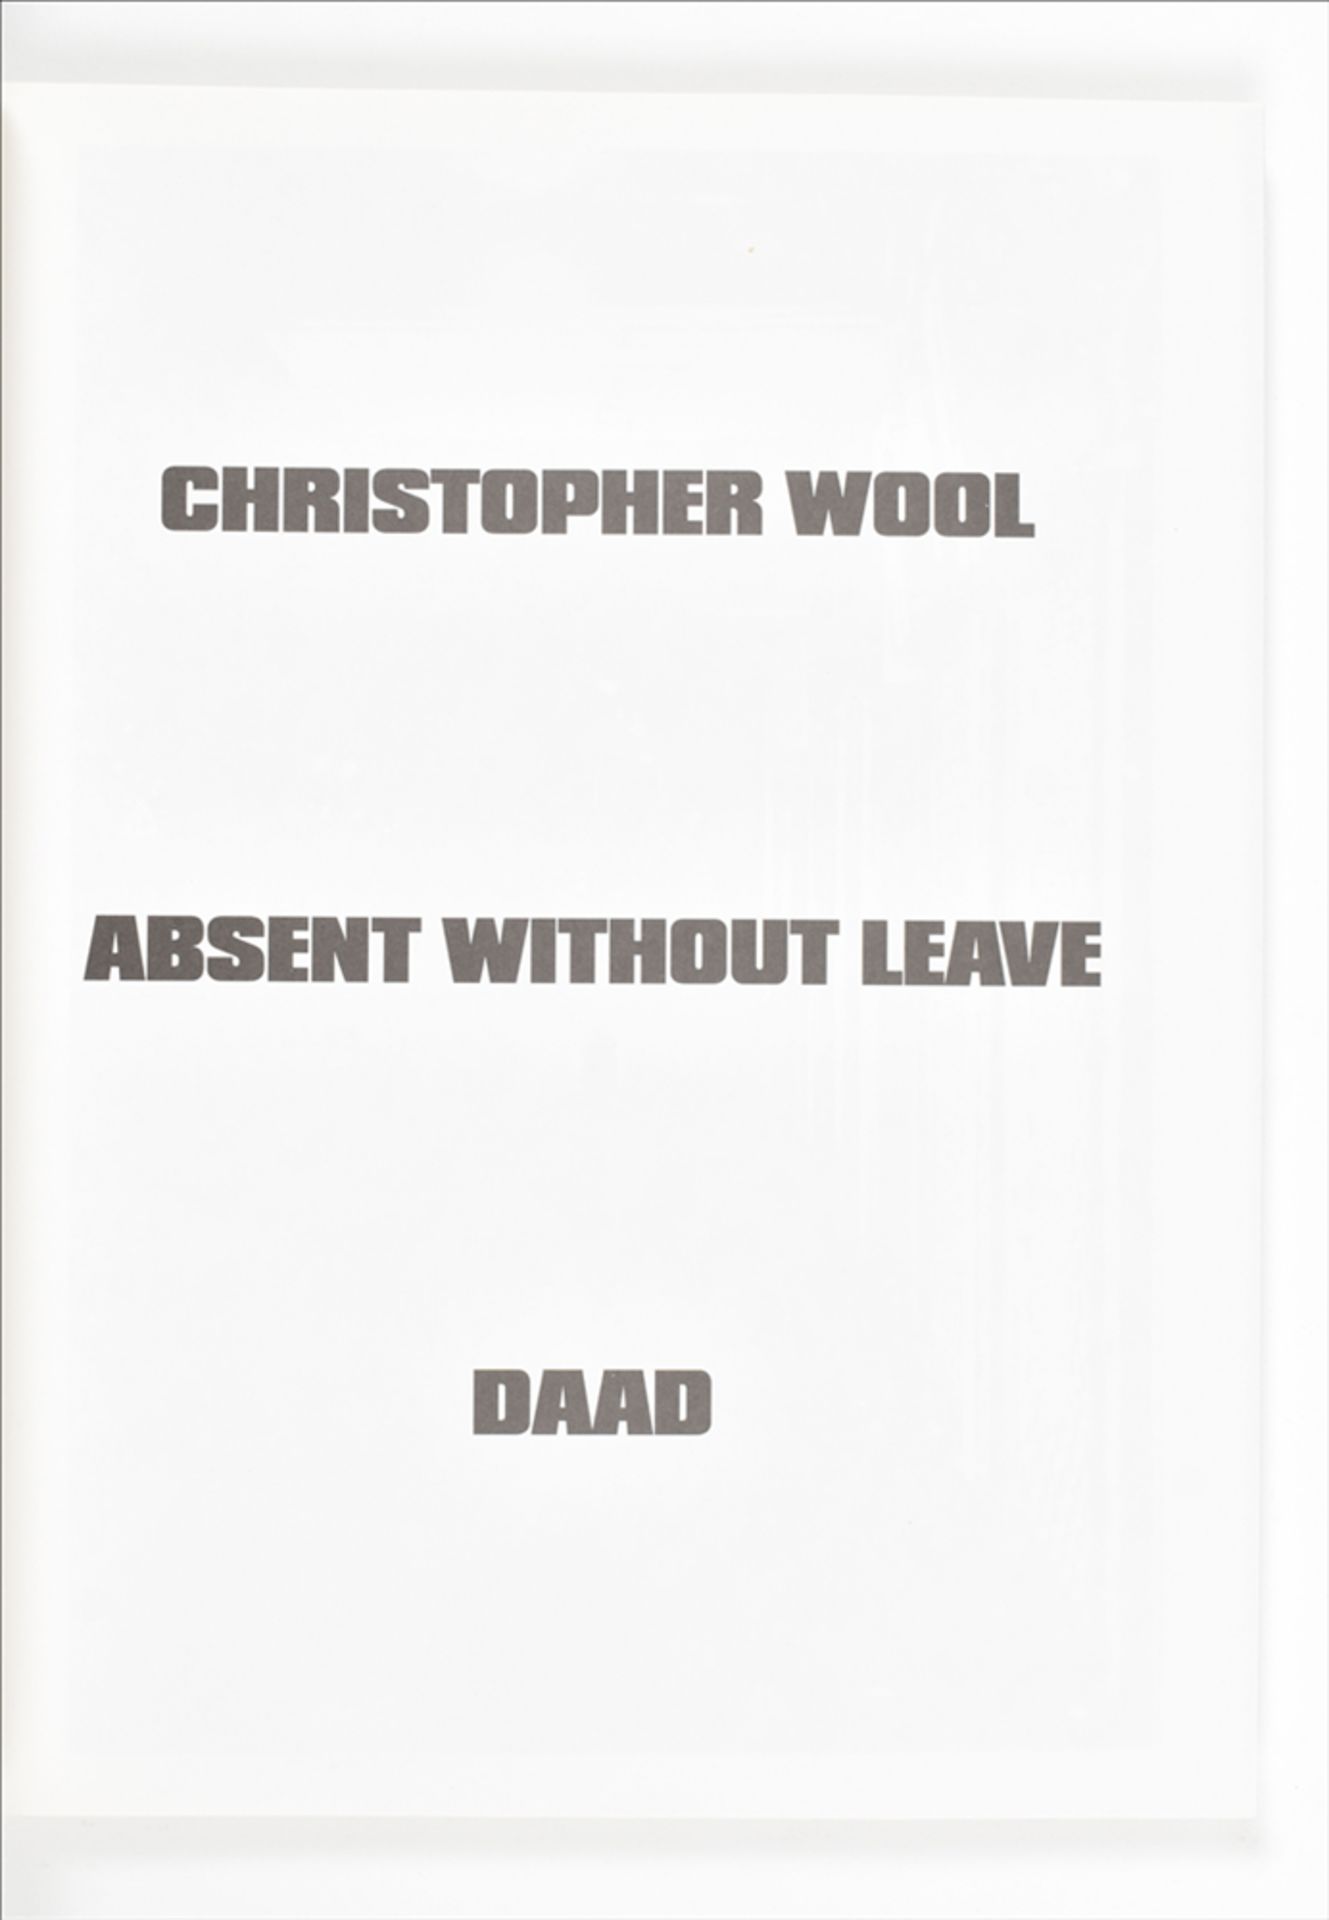 Christopher Wool, Absent without Leave - Image 3 of 8